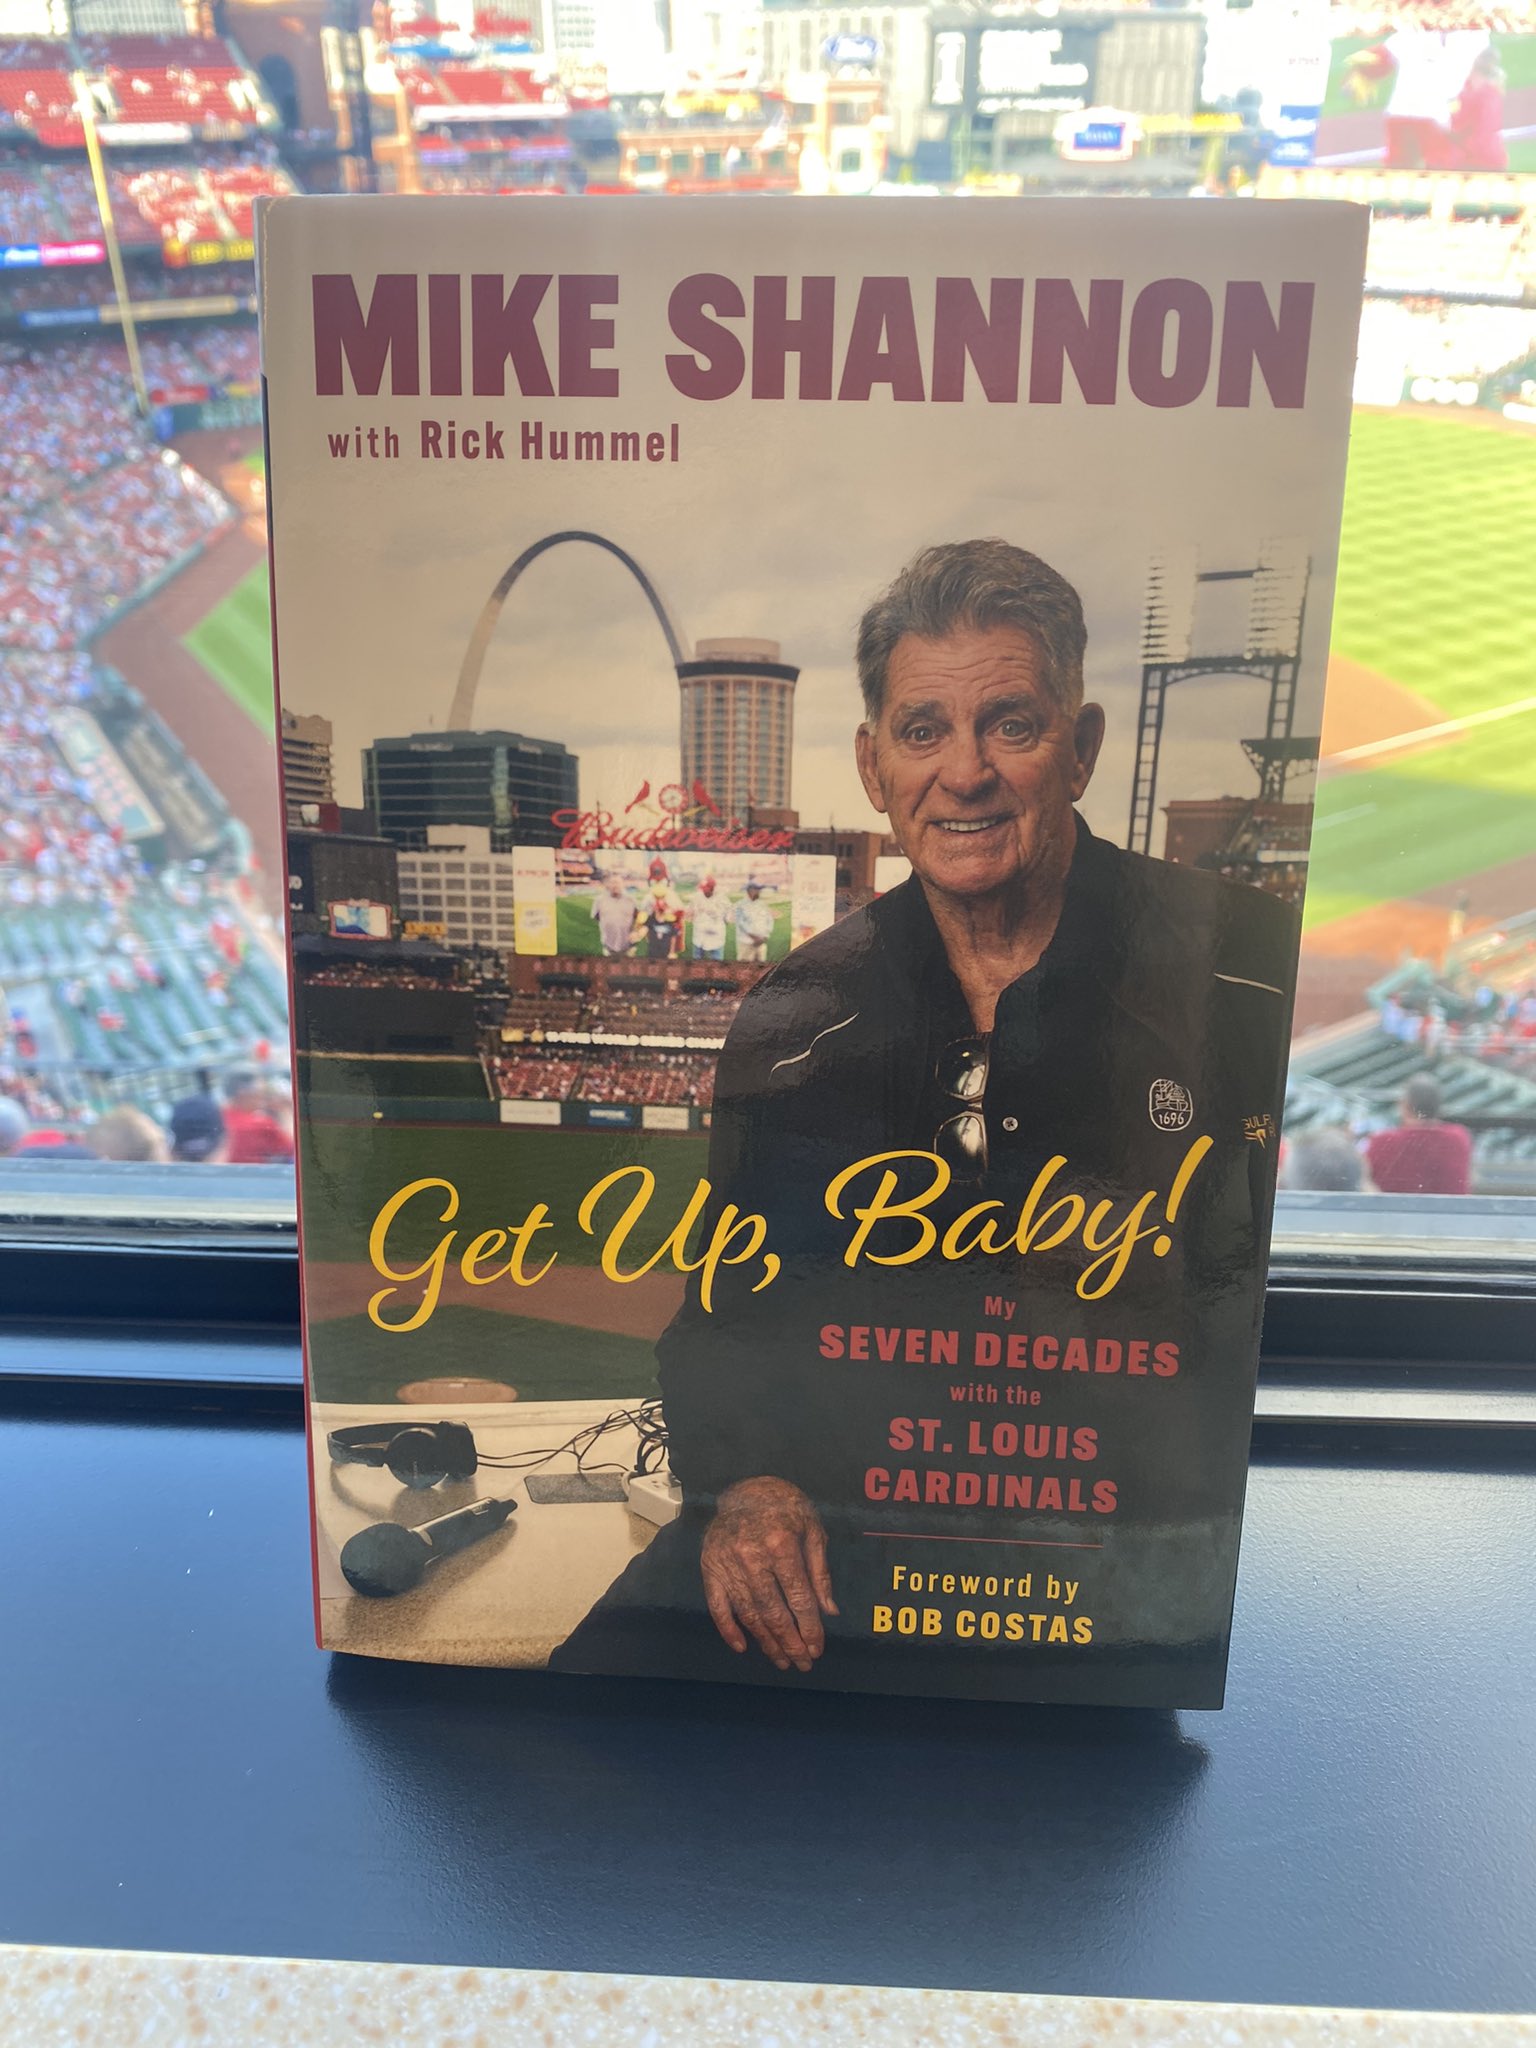 Get Up, Baby!: My Seven Decades With the St. Louis Cardinals by